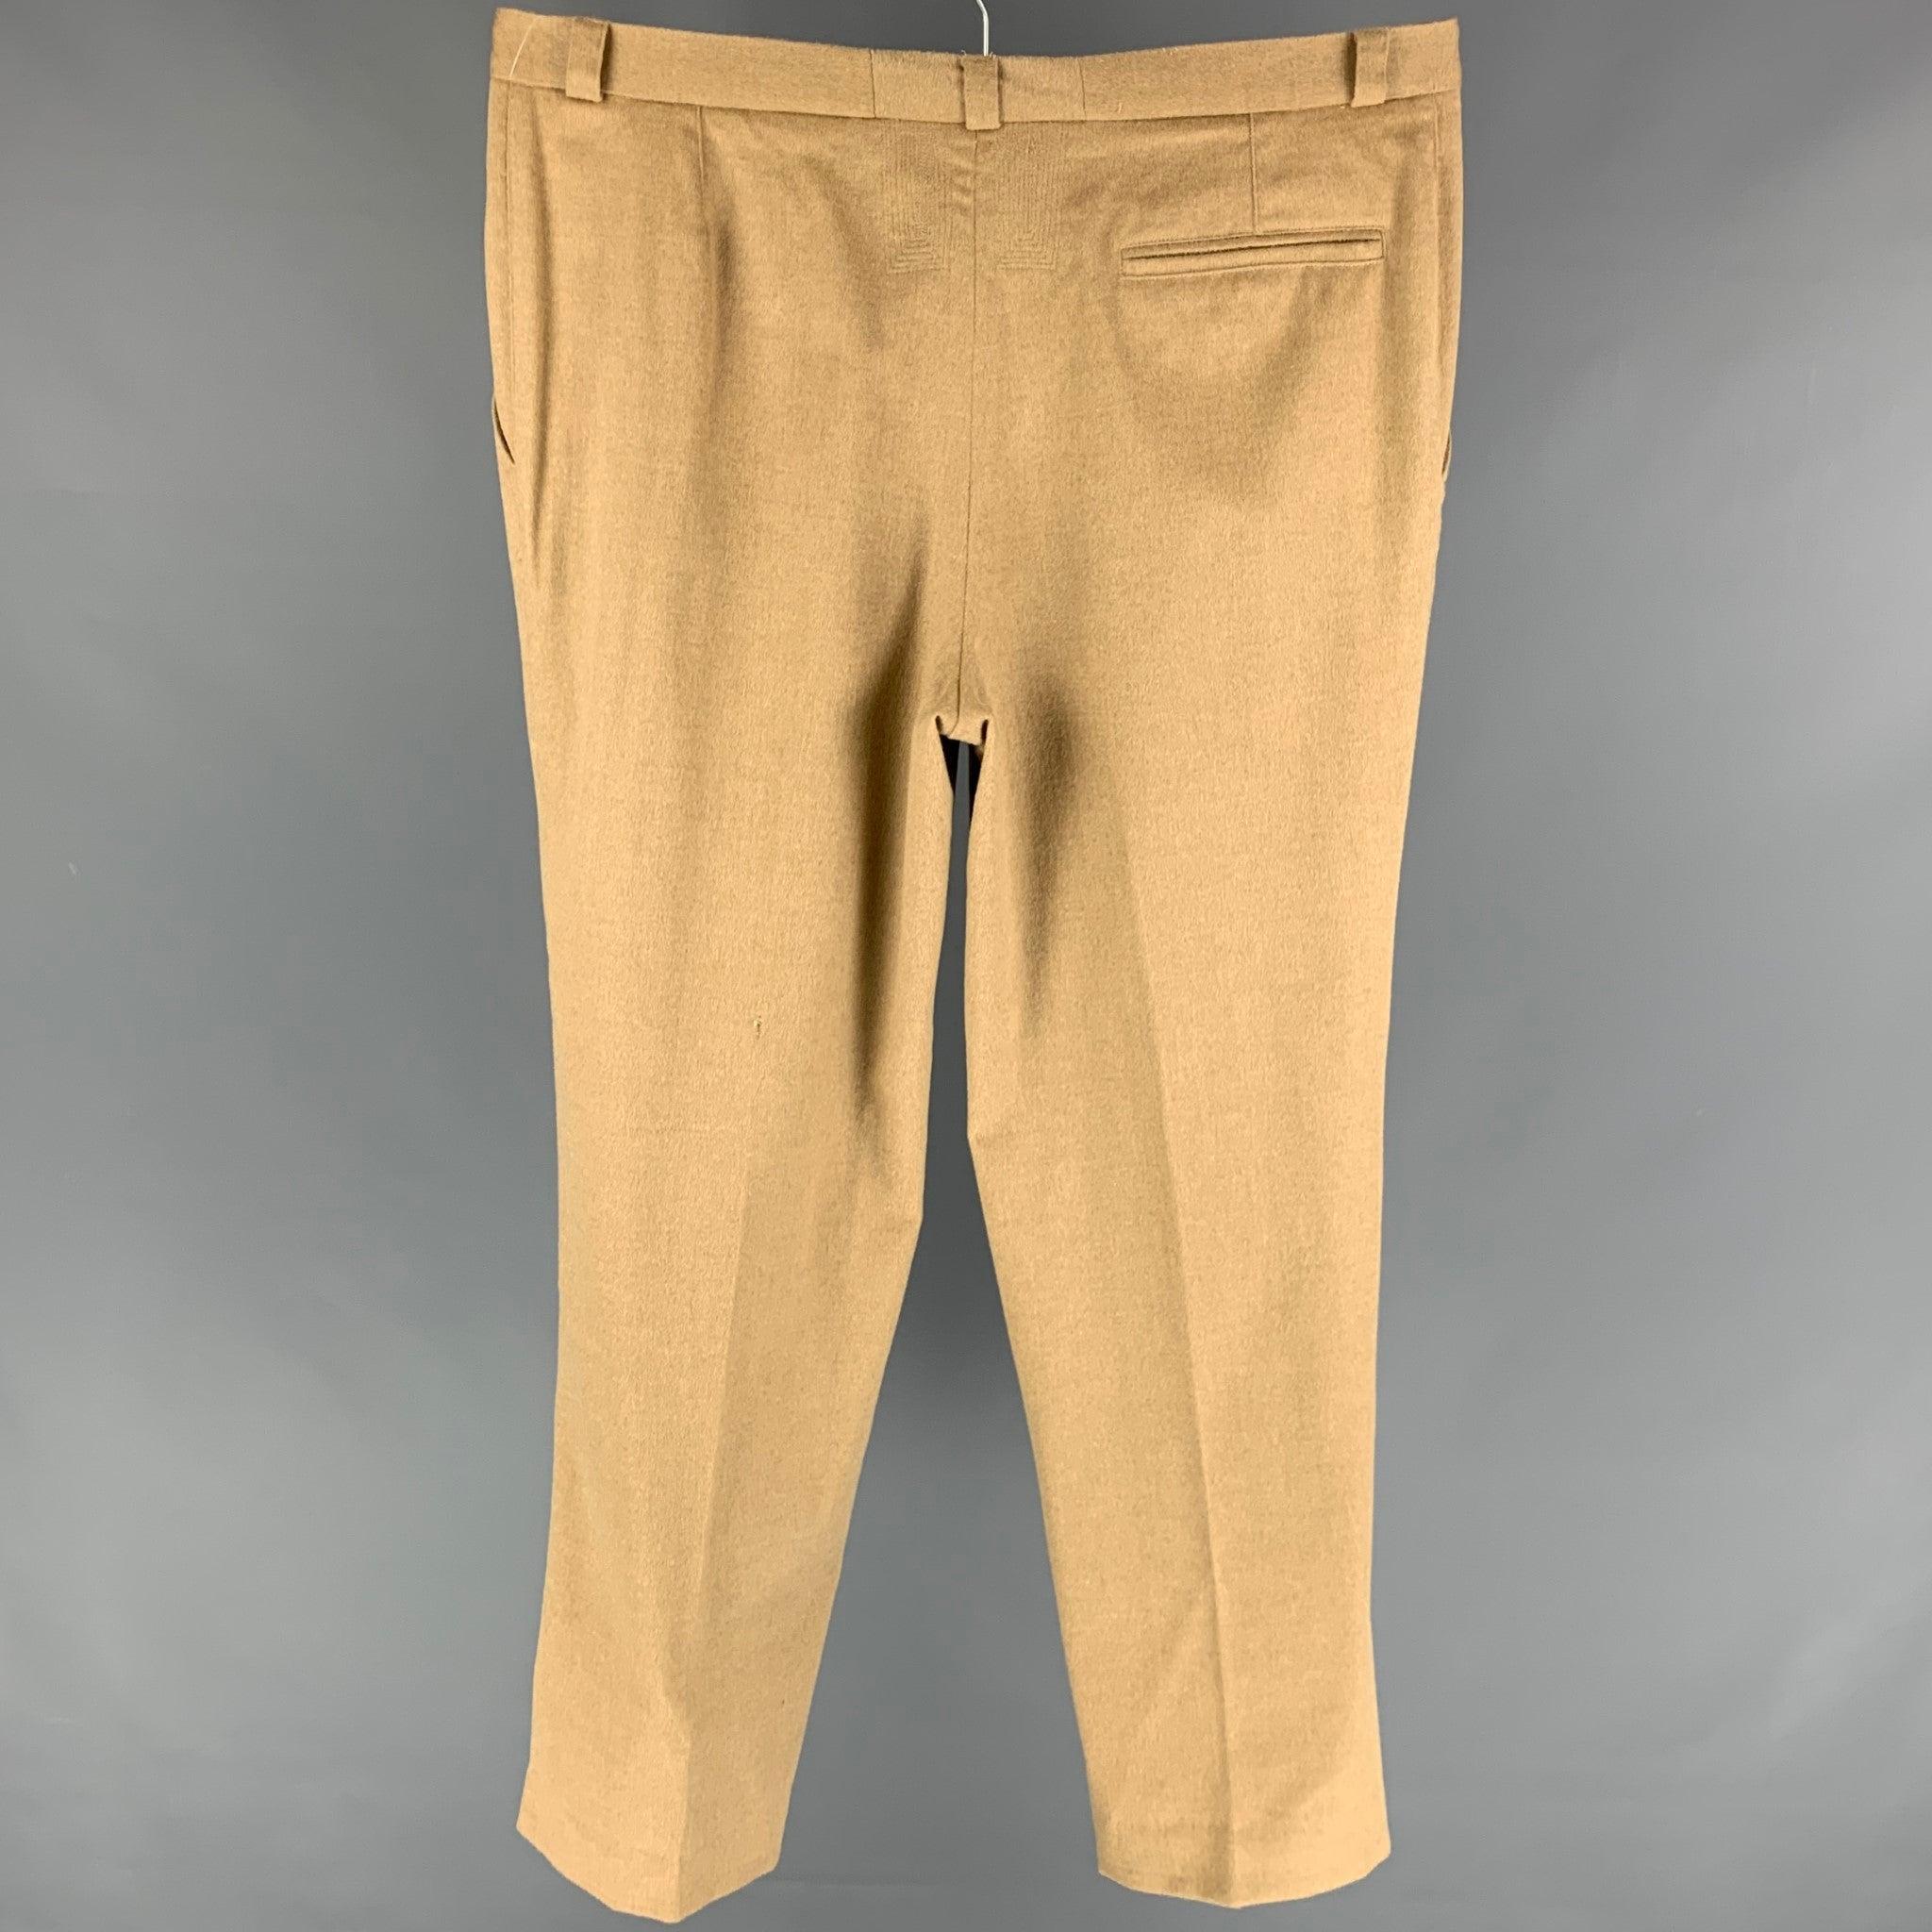 Vintage GIANNI VERSACE dress pants comes in a tan angora wool featuring a pleated style, loose fit, and a zip fly closure.
Good
Pre-Owned Condition. 

Marked:   50 

Measurements: 
  Waist: 38 inches  Rise: 12.5 inches  Inseam: 32 inches 
  
  
